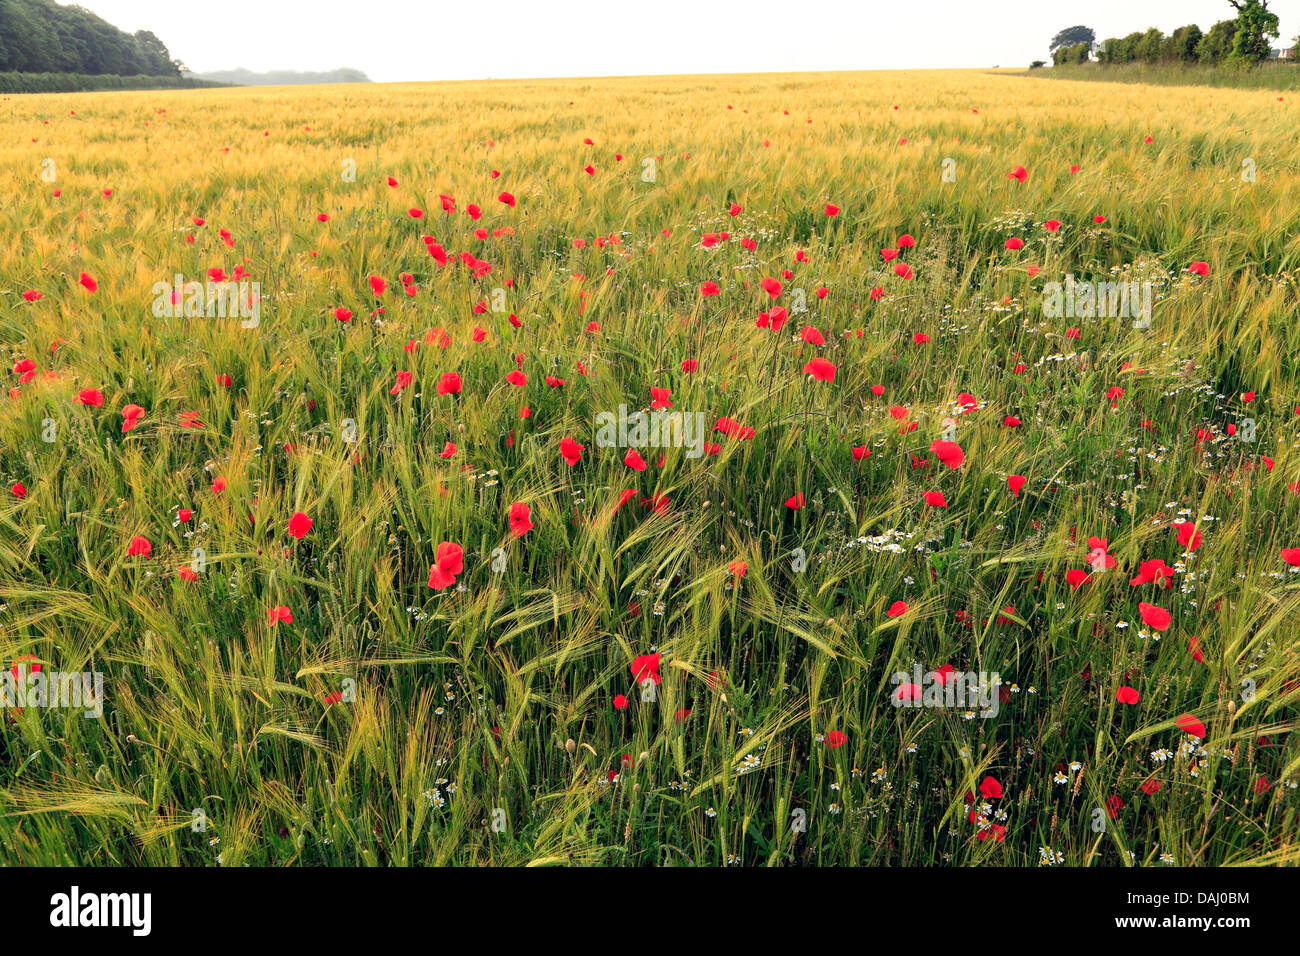 Barley Field with poppies, Hordeum vulgare, agriculture crop fields England UK Stock Photo